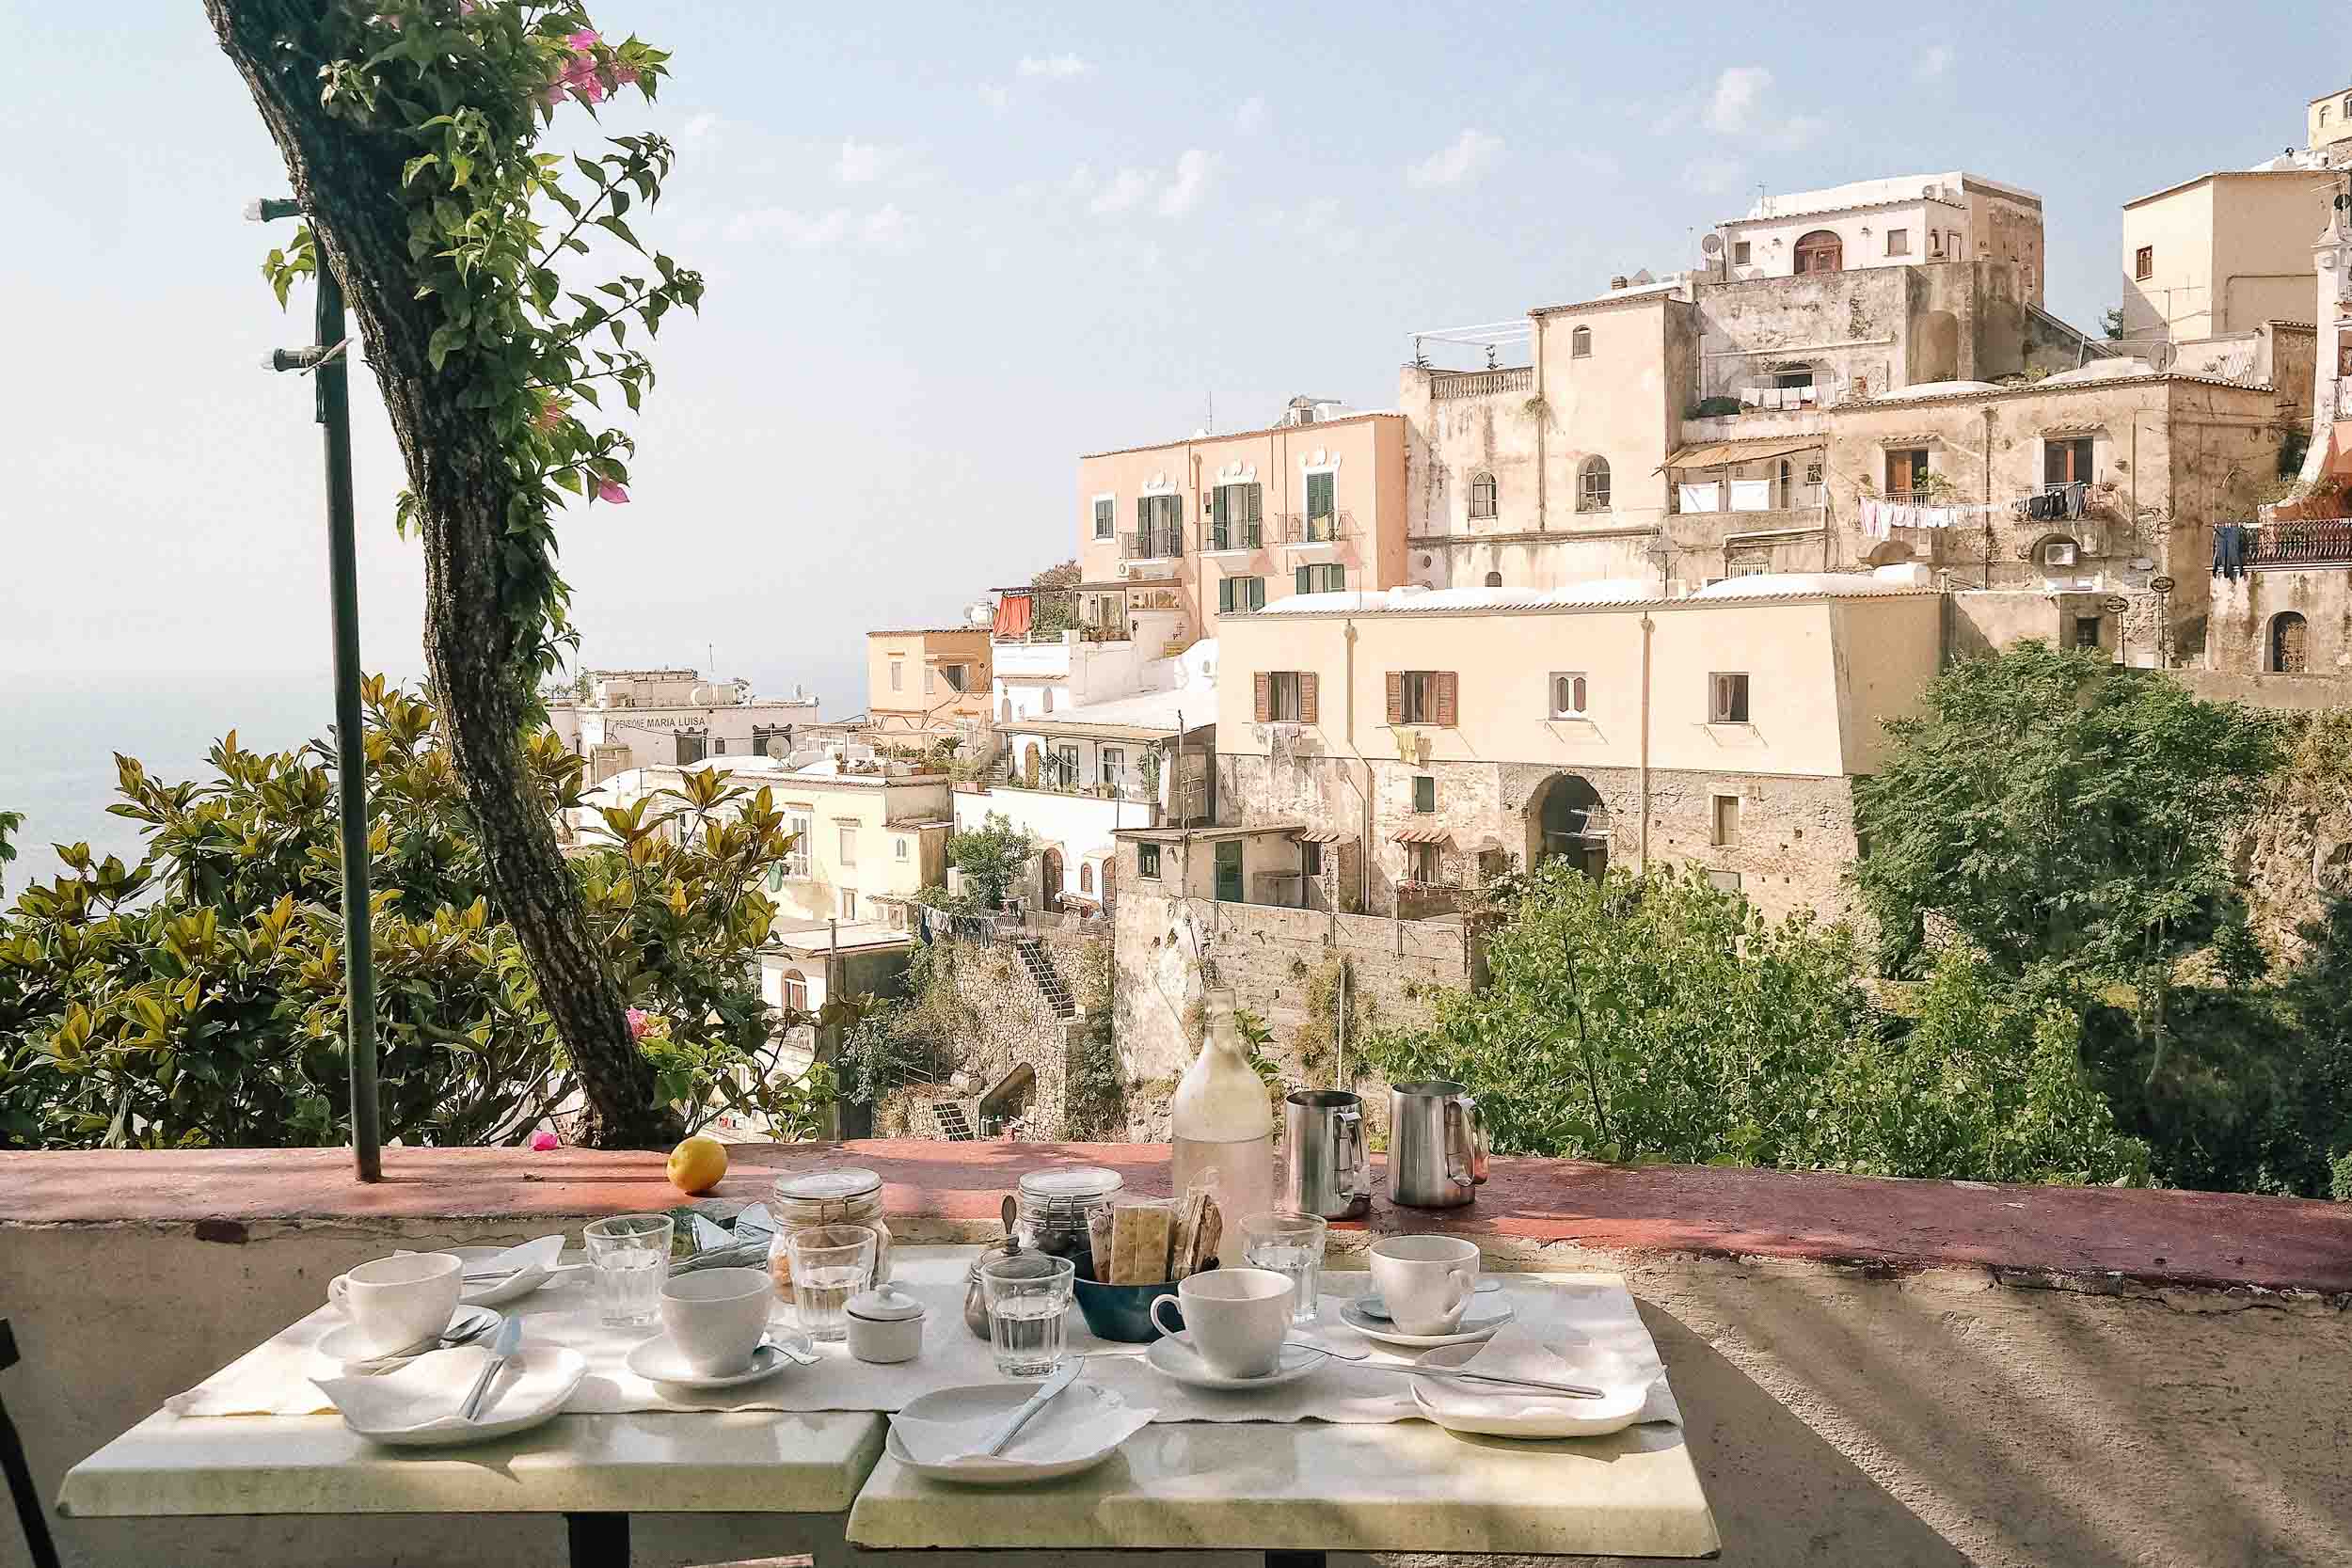 Breakfast at Dimora del Podesta, the best place to stay in Positano